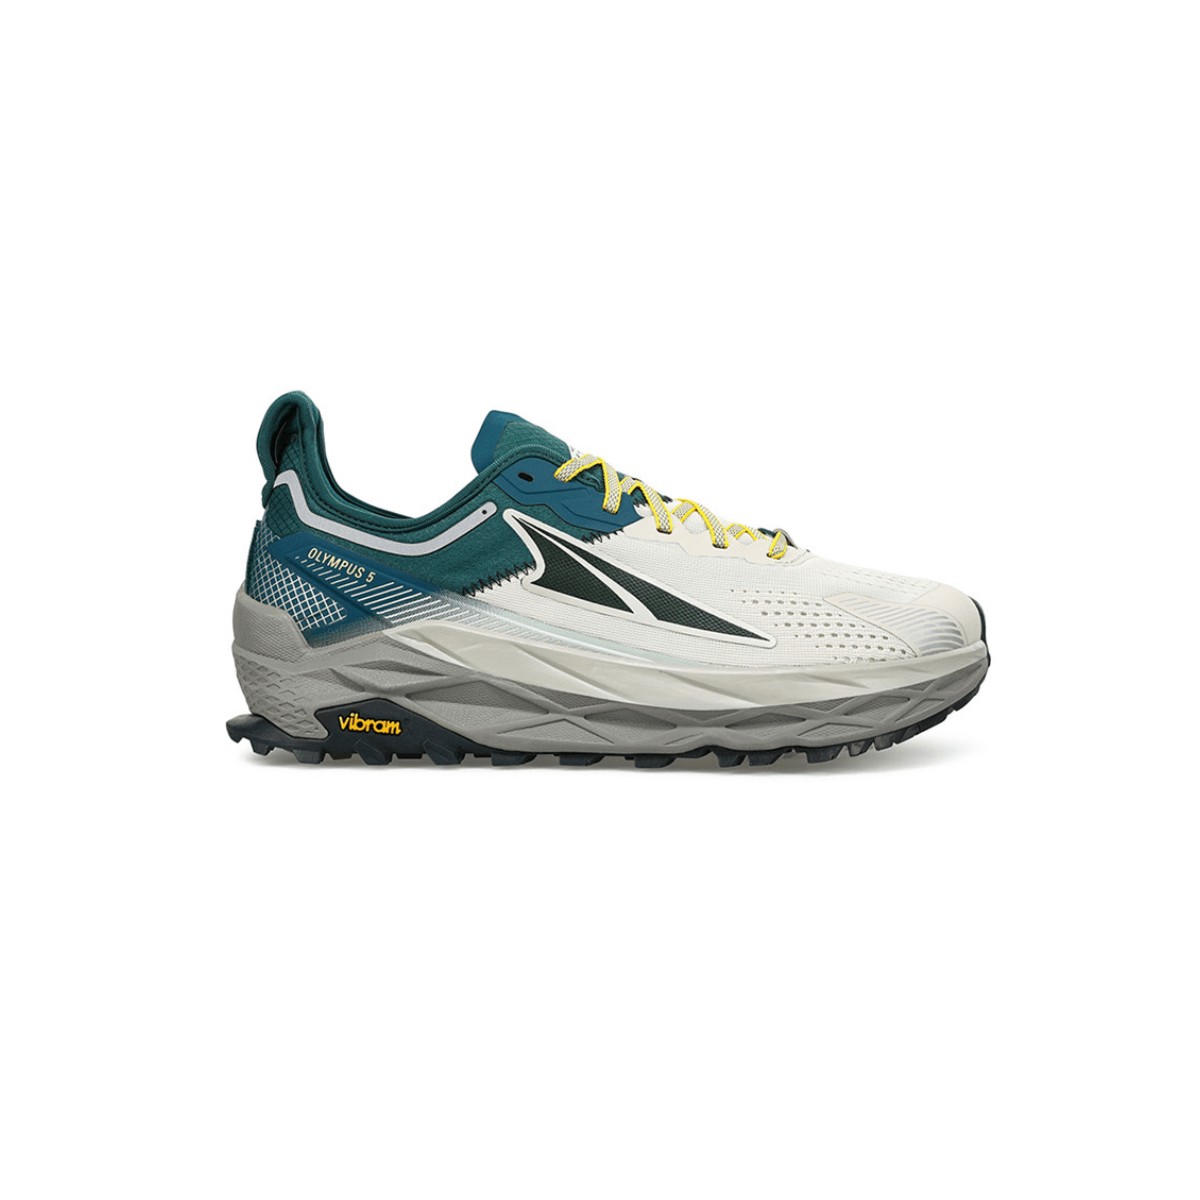 Chaussures Altra Olympus 5.0 blanc gris AW22, Taille 42 - EUR